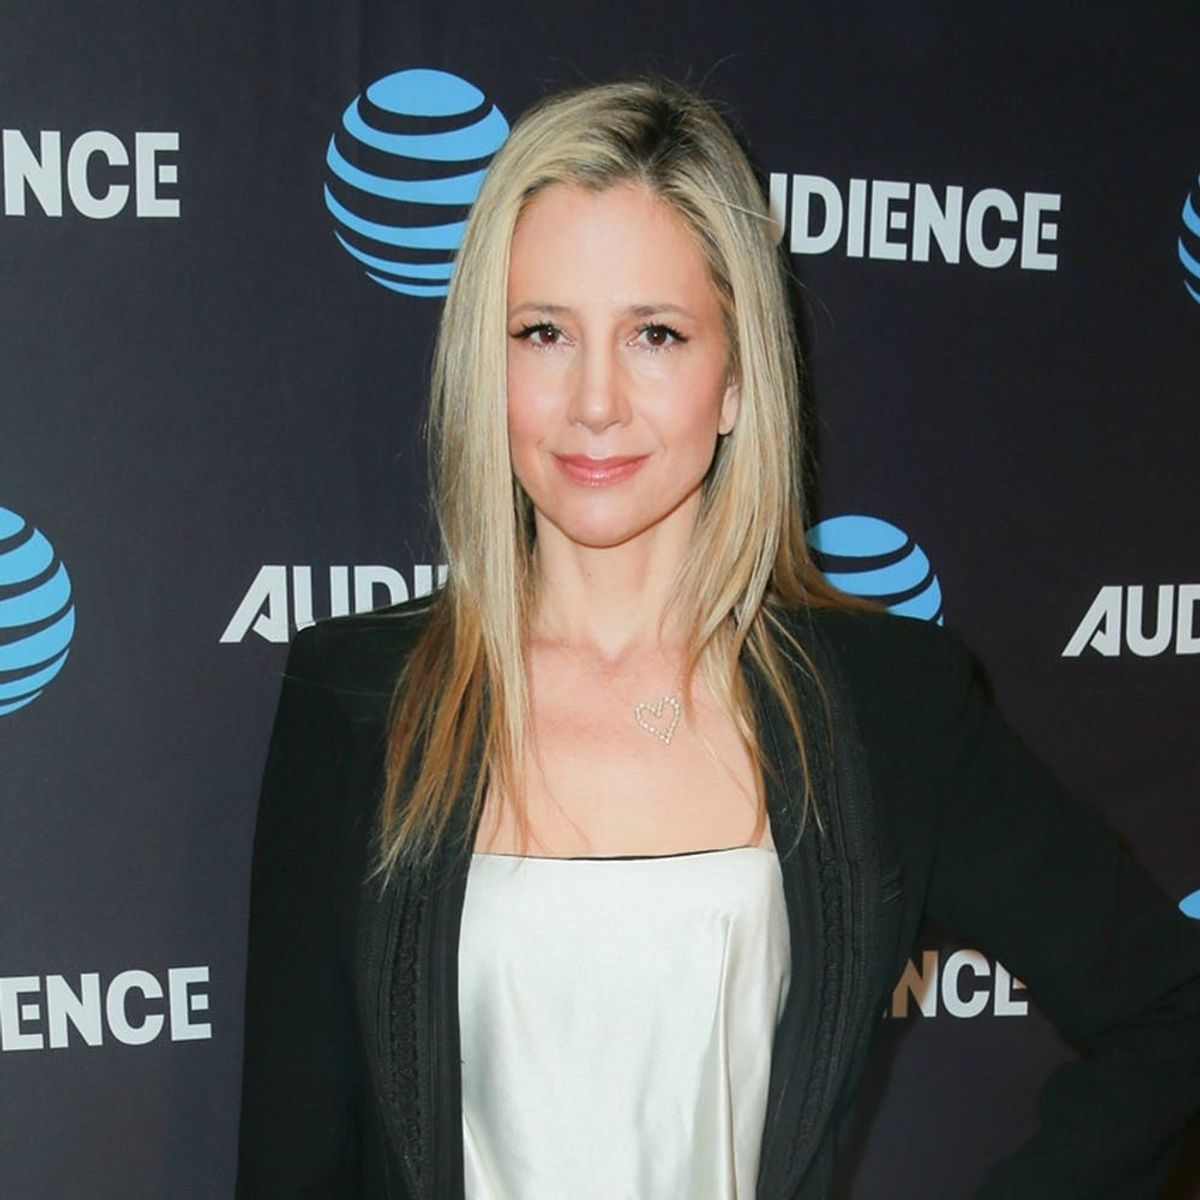 Mira Sorvino Has Made a Woody Allen-Related Apology to Dylan Farrow